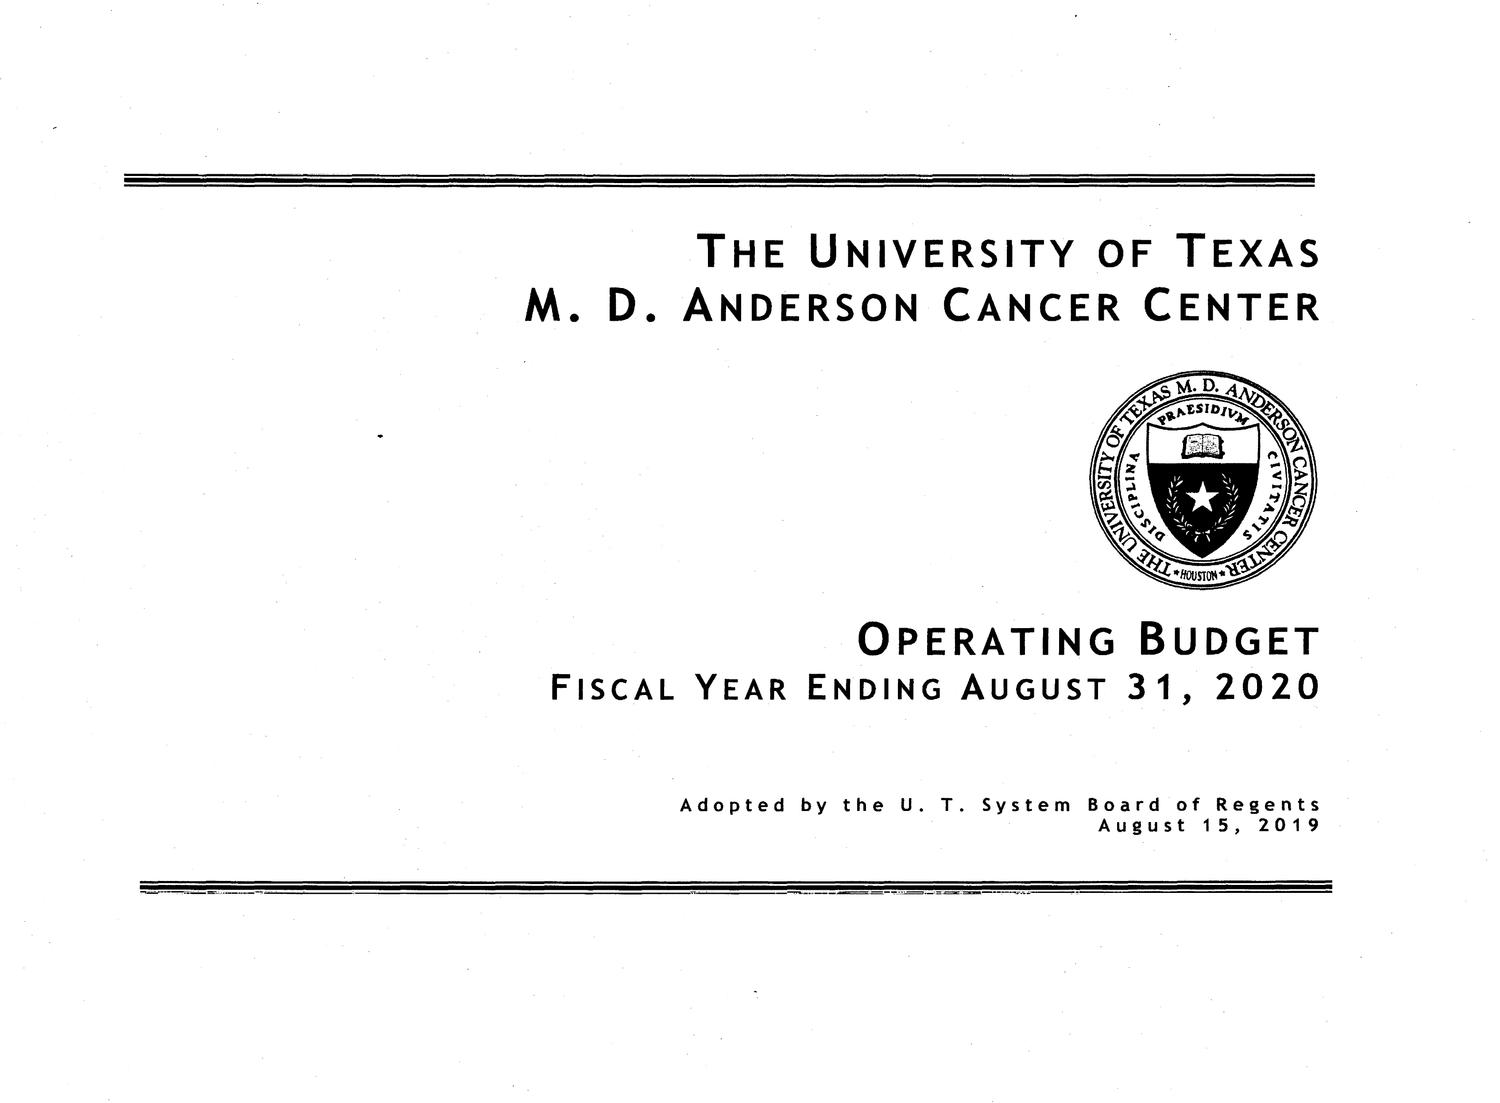 University of Texas M. D. Anderson Cancer Center Operating Budget: 2020
                                                
                                                    TITLE PAGE
                                                